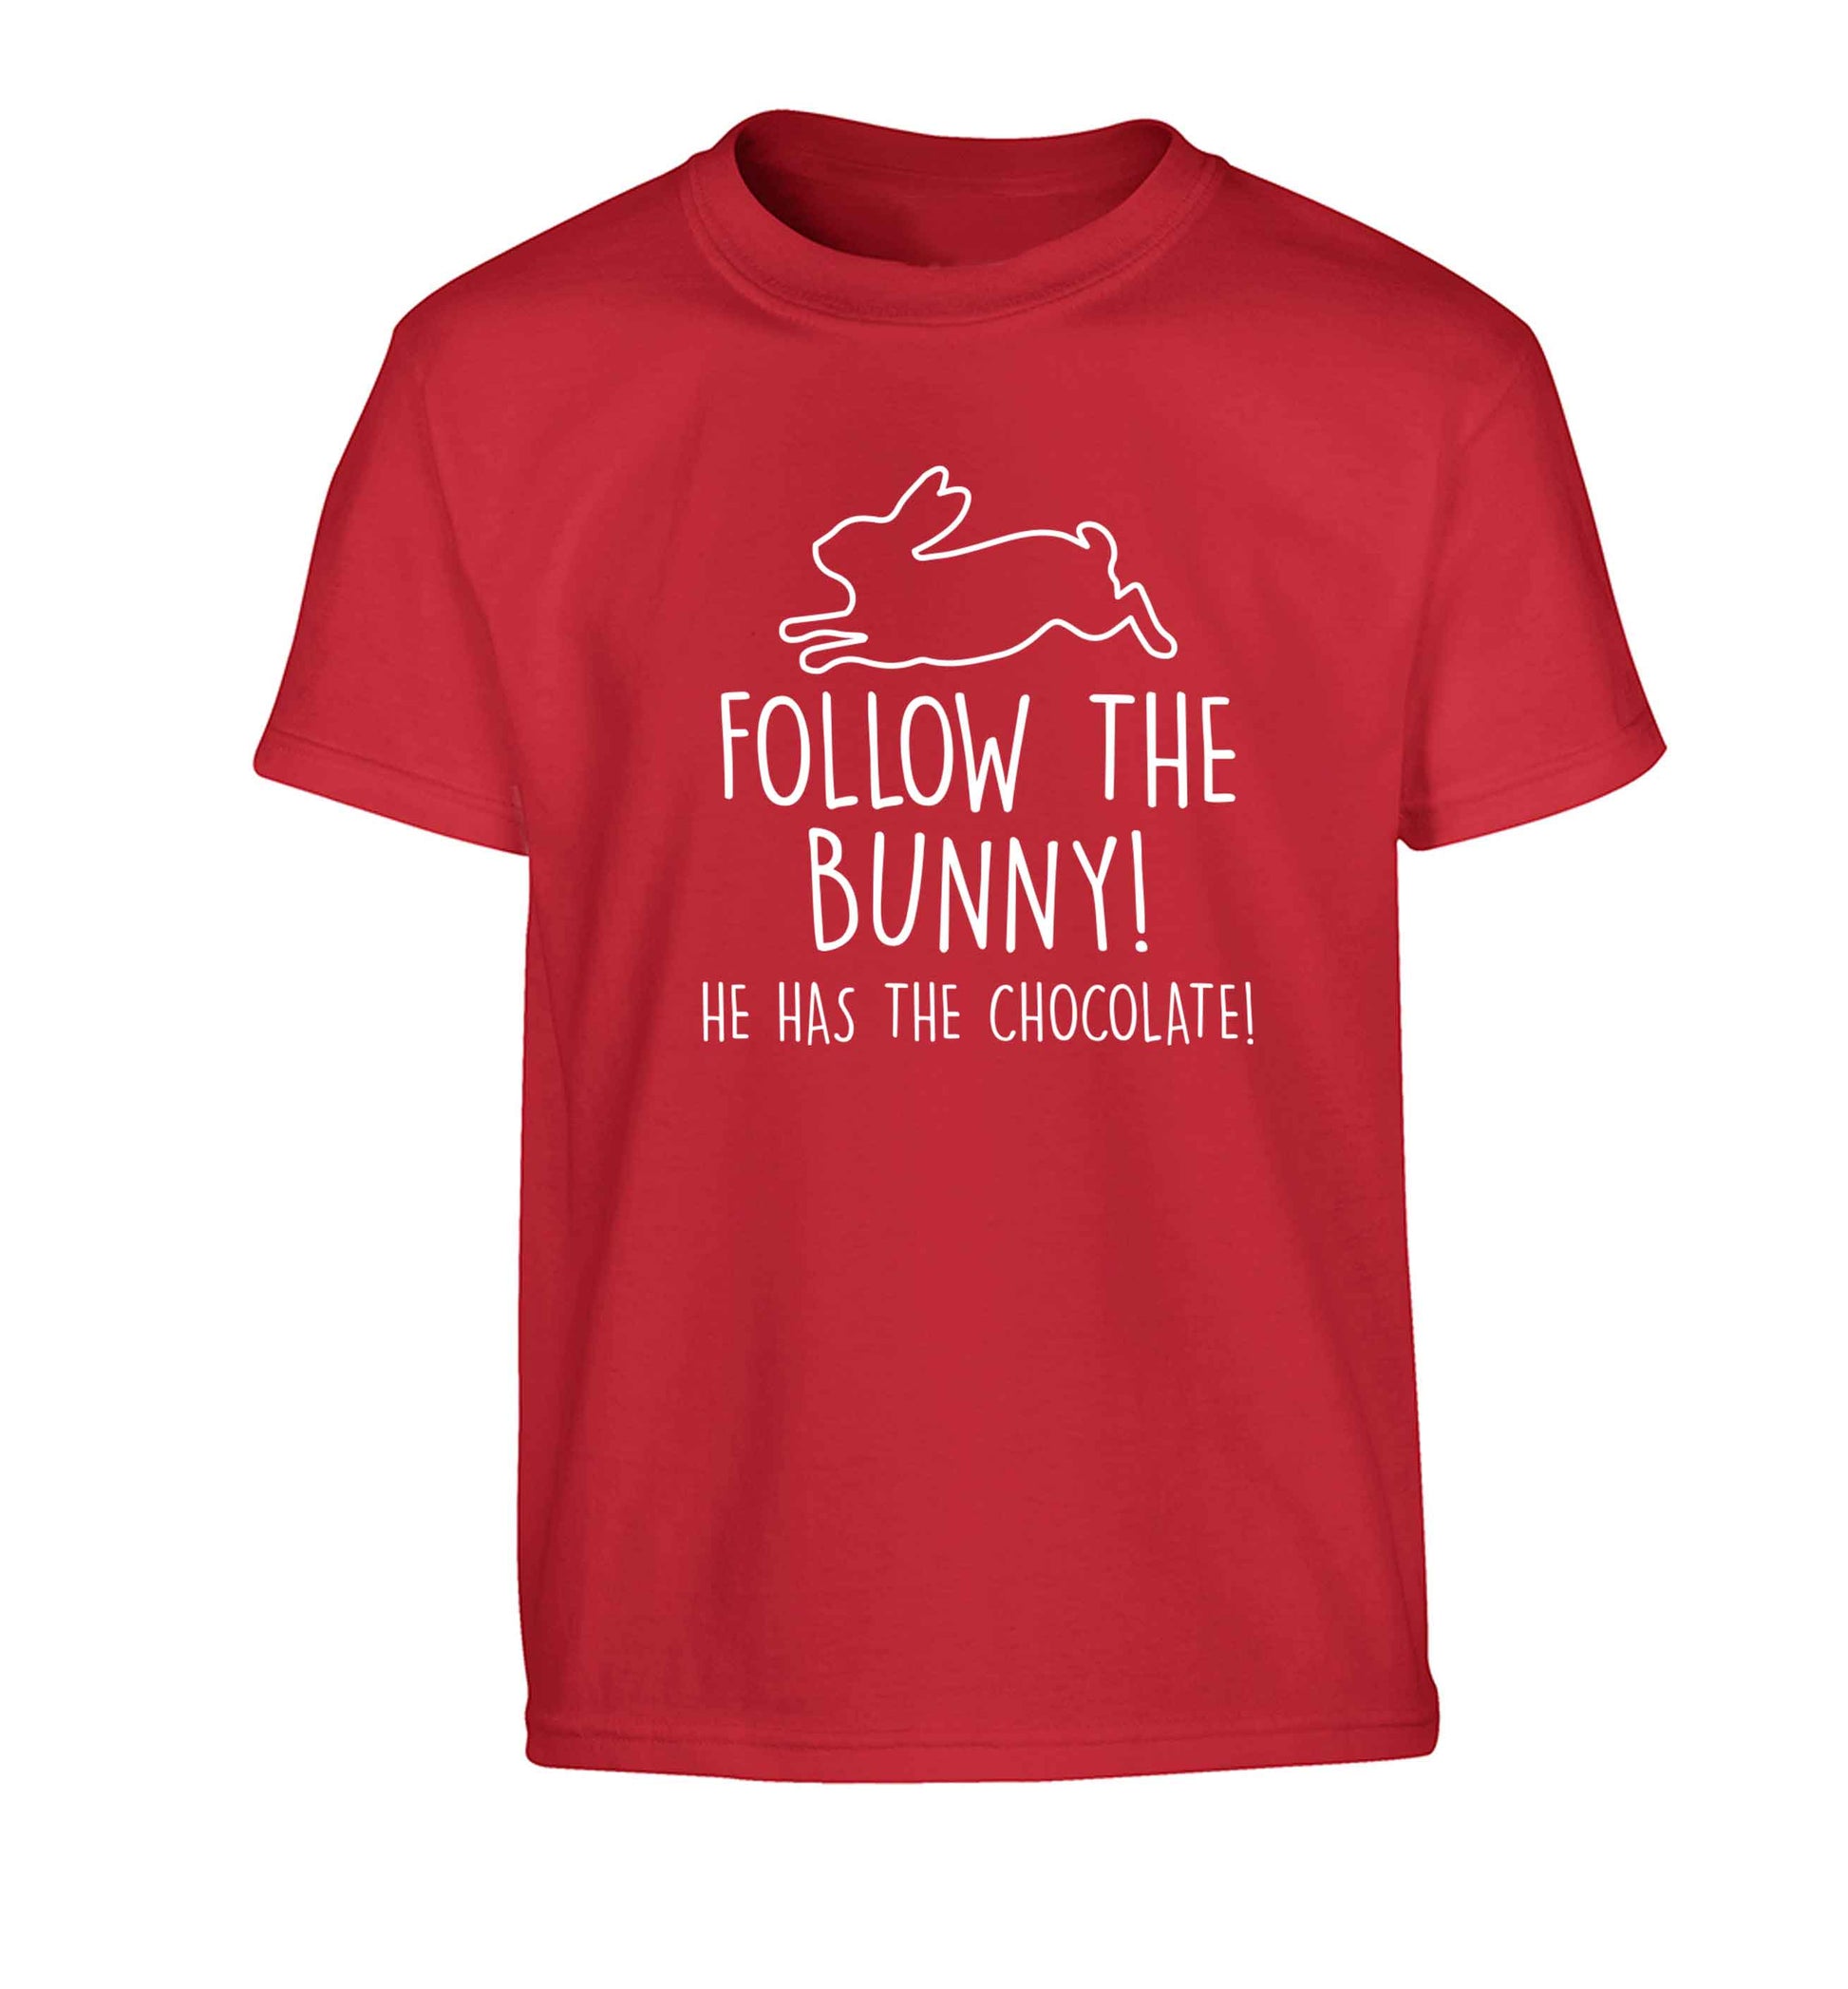 Follow the bunny! He has the chocolate Children's red Tshirt 12-13 Years